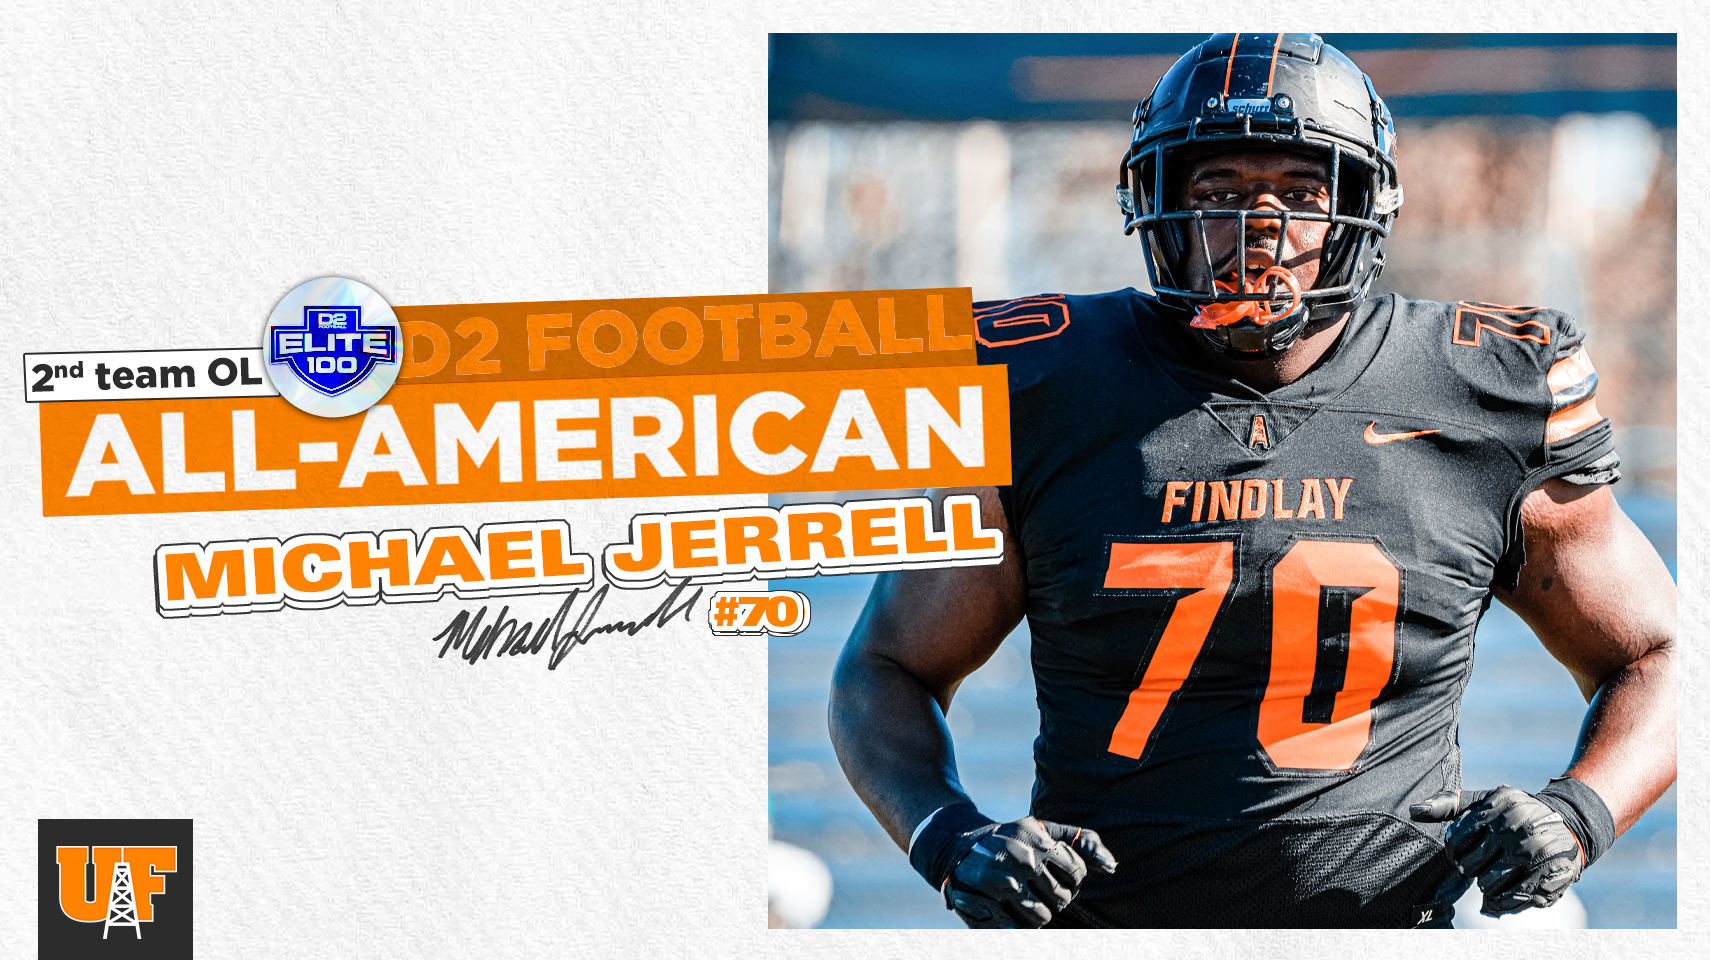 Mike Jerrell d2 football all american graphic